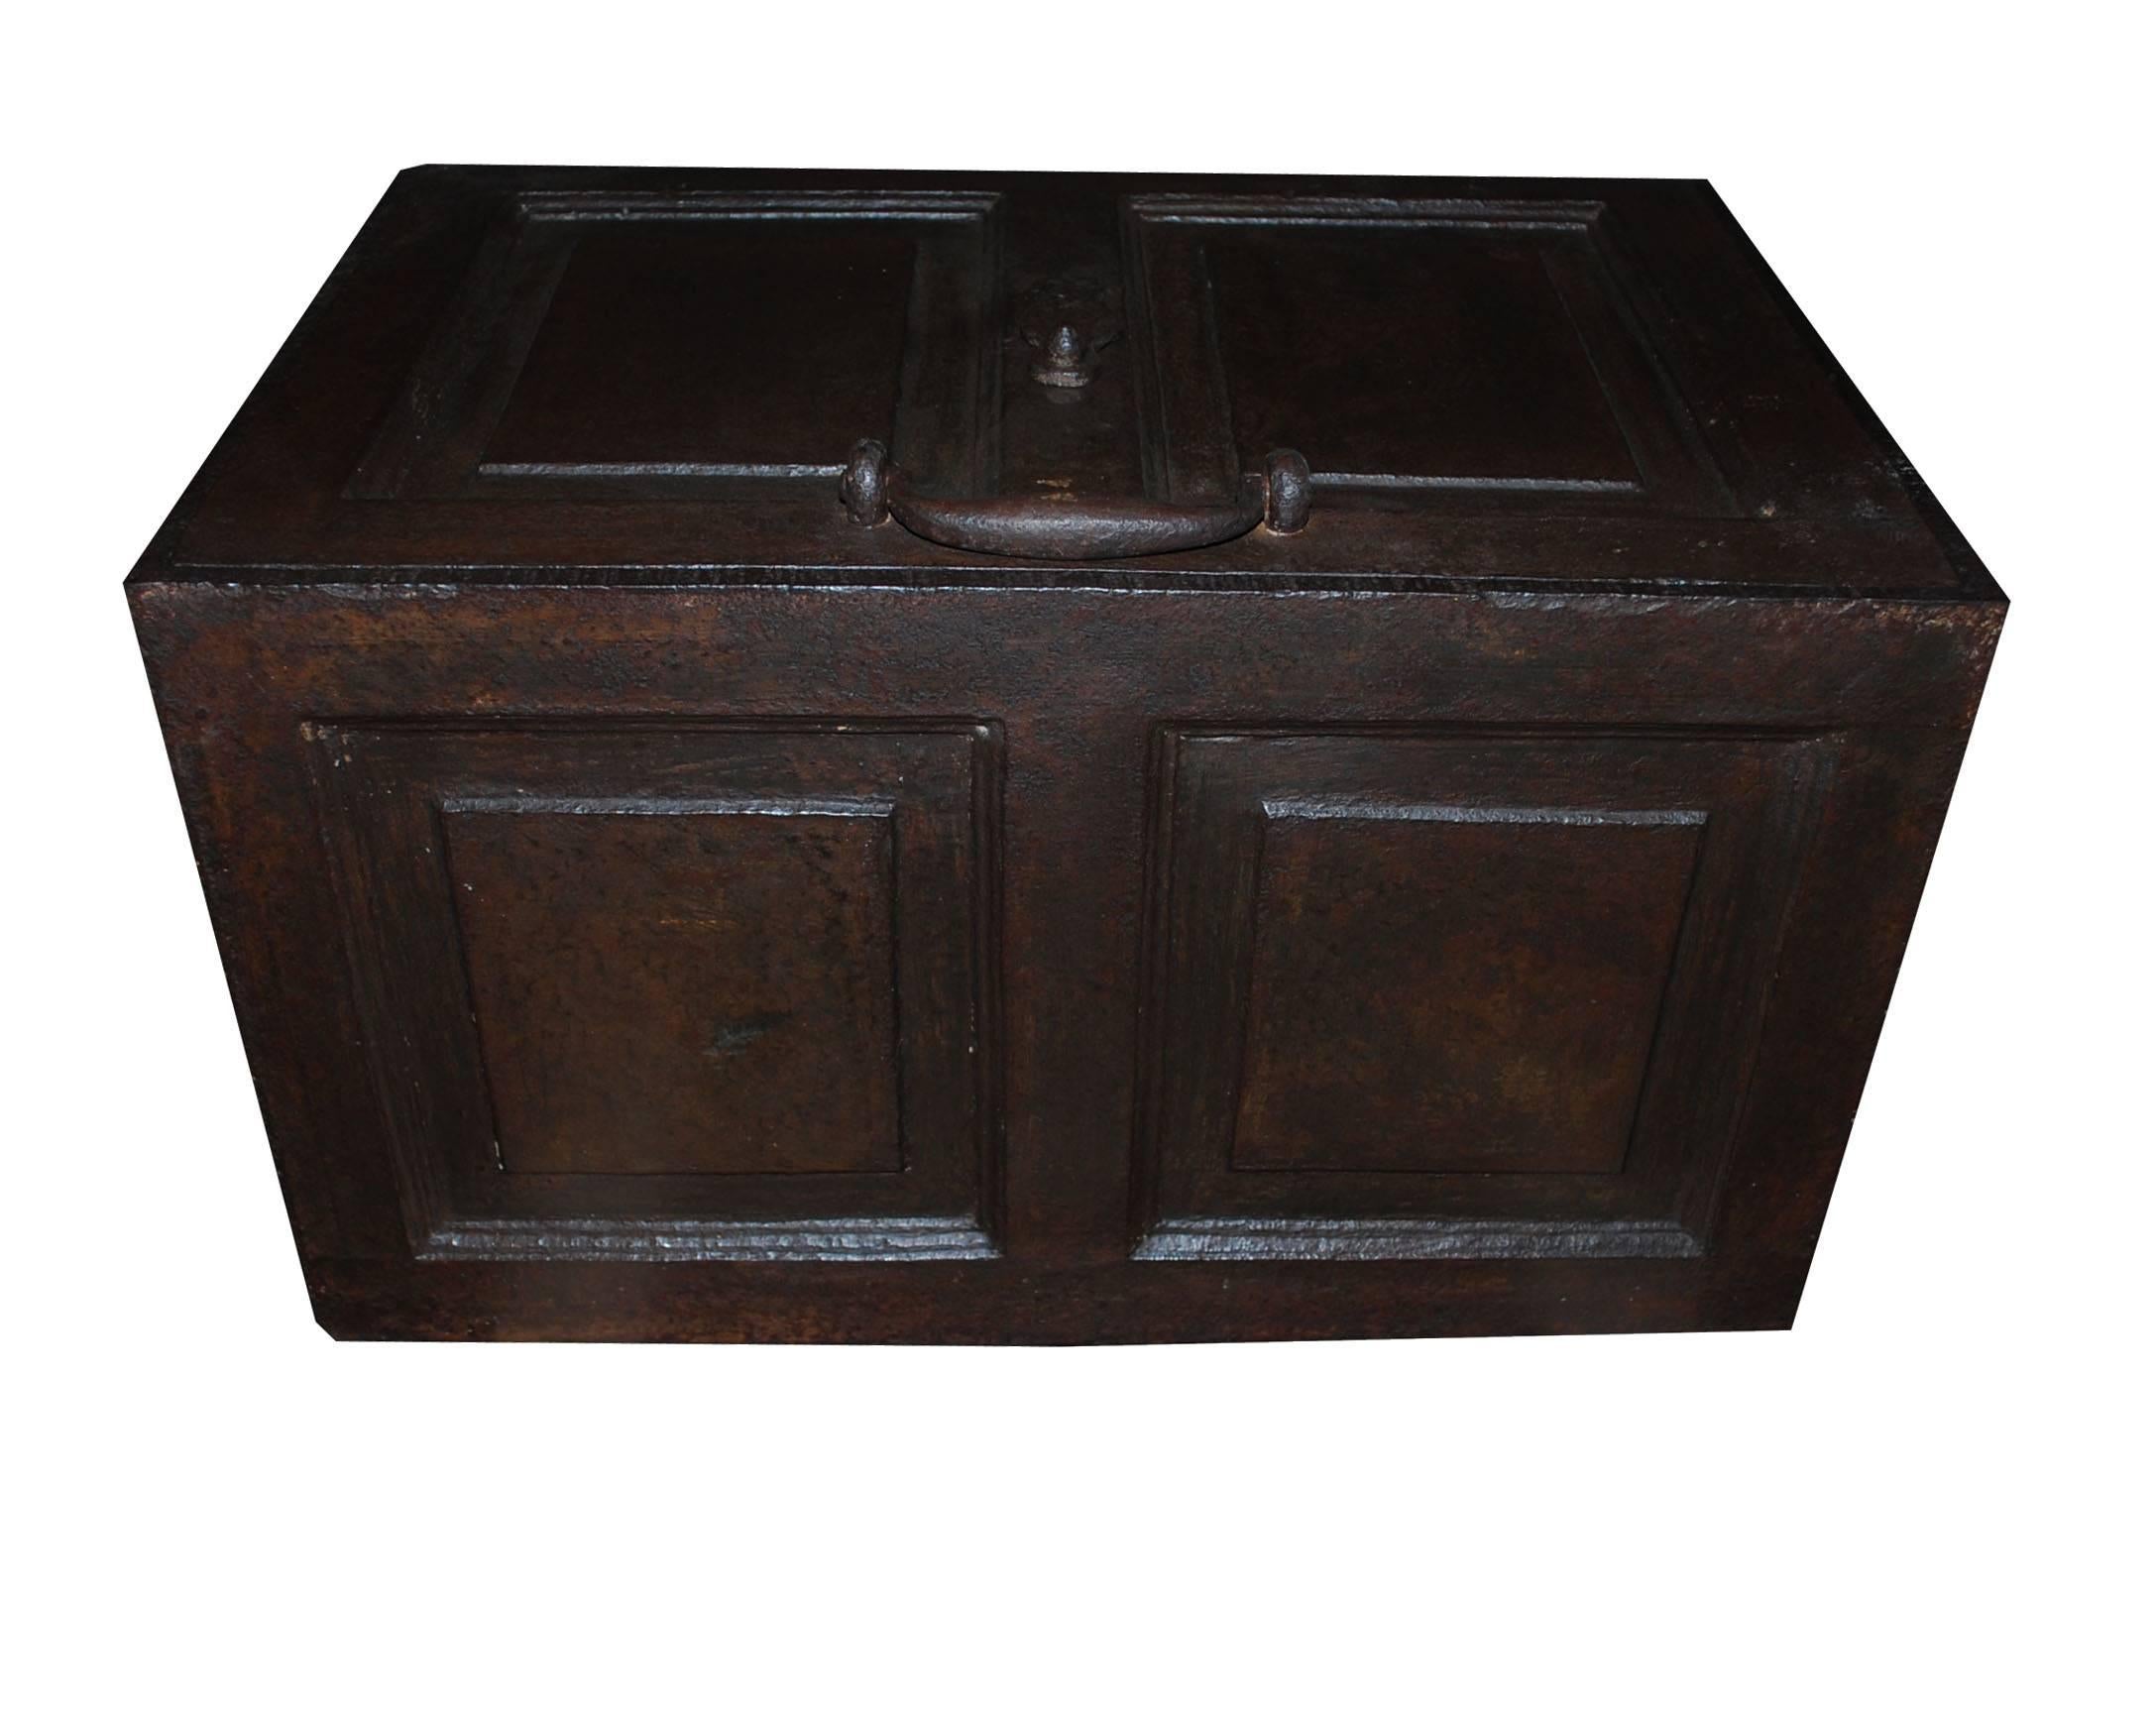 19th century cast iron strong box or safe with brass key.
Very heavy.
Originates Holland, dating approximately 1850.
(Shipping costs on request, depends on destination).